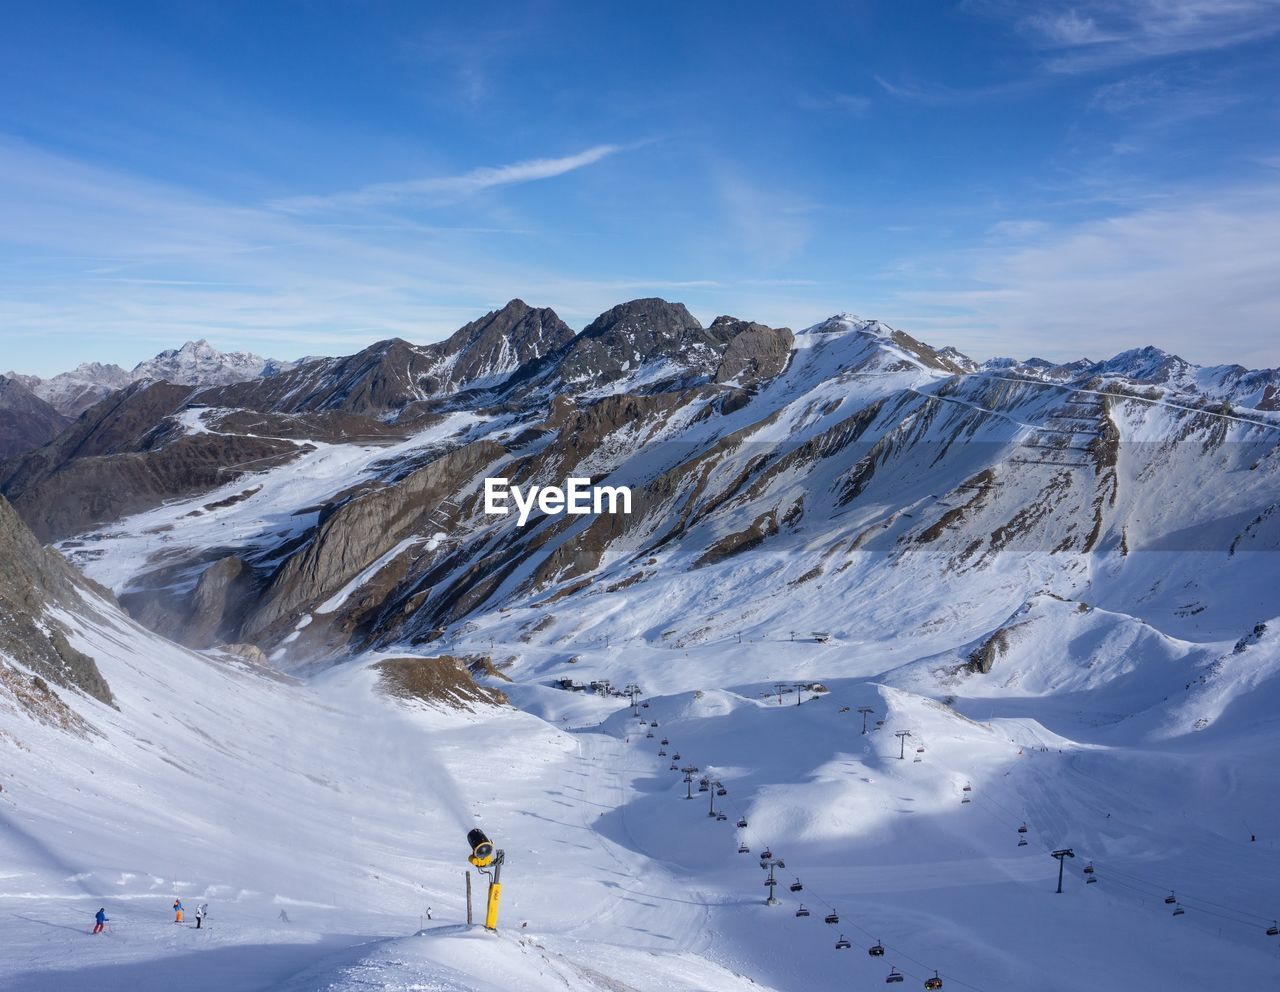 Scenic view of snowcapped mountains against sky with a snowgun in ischgl